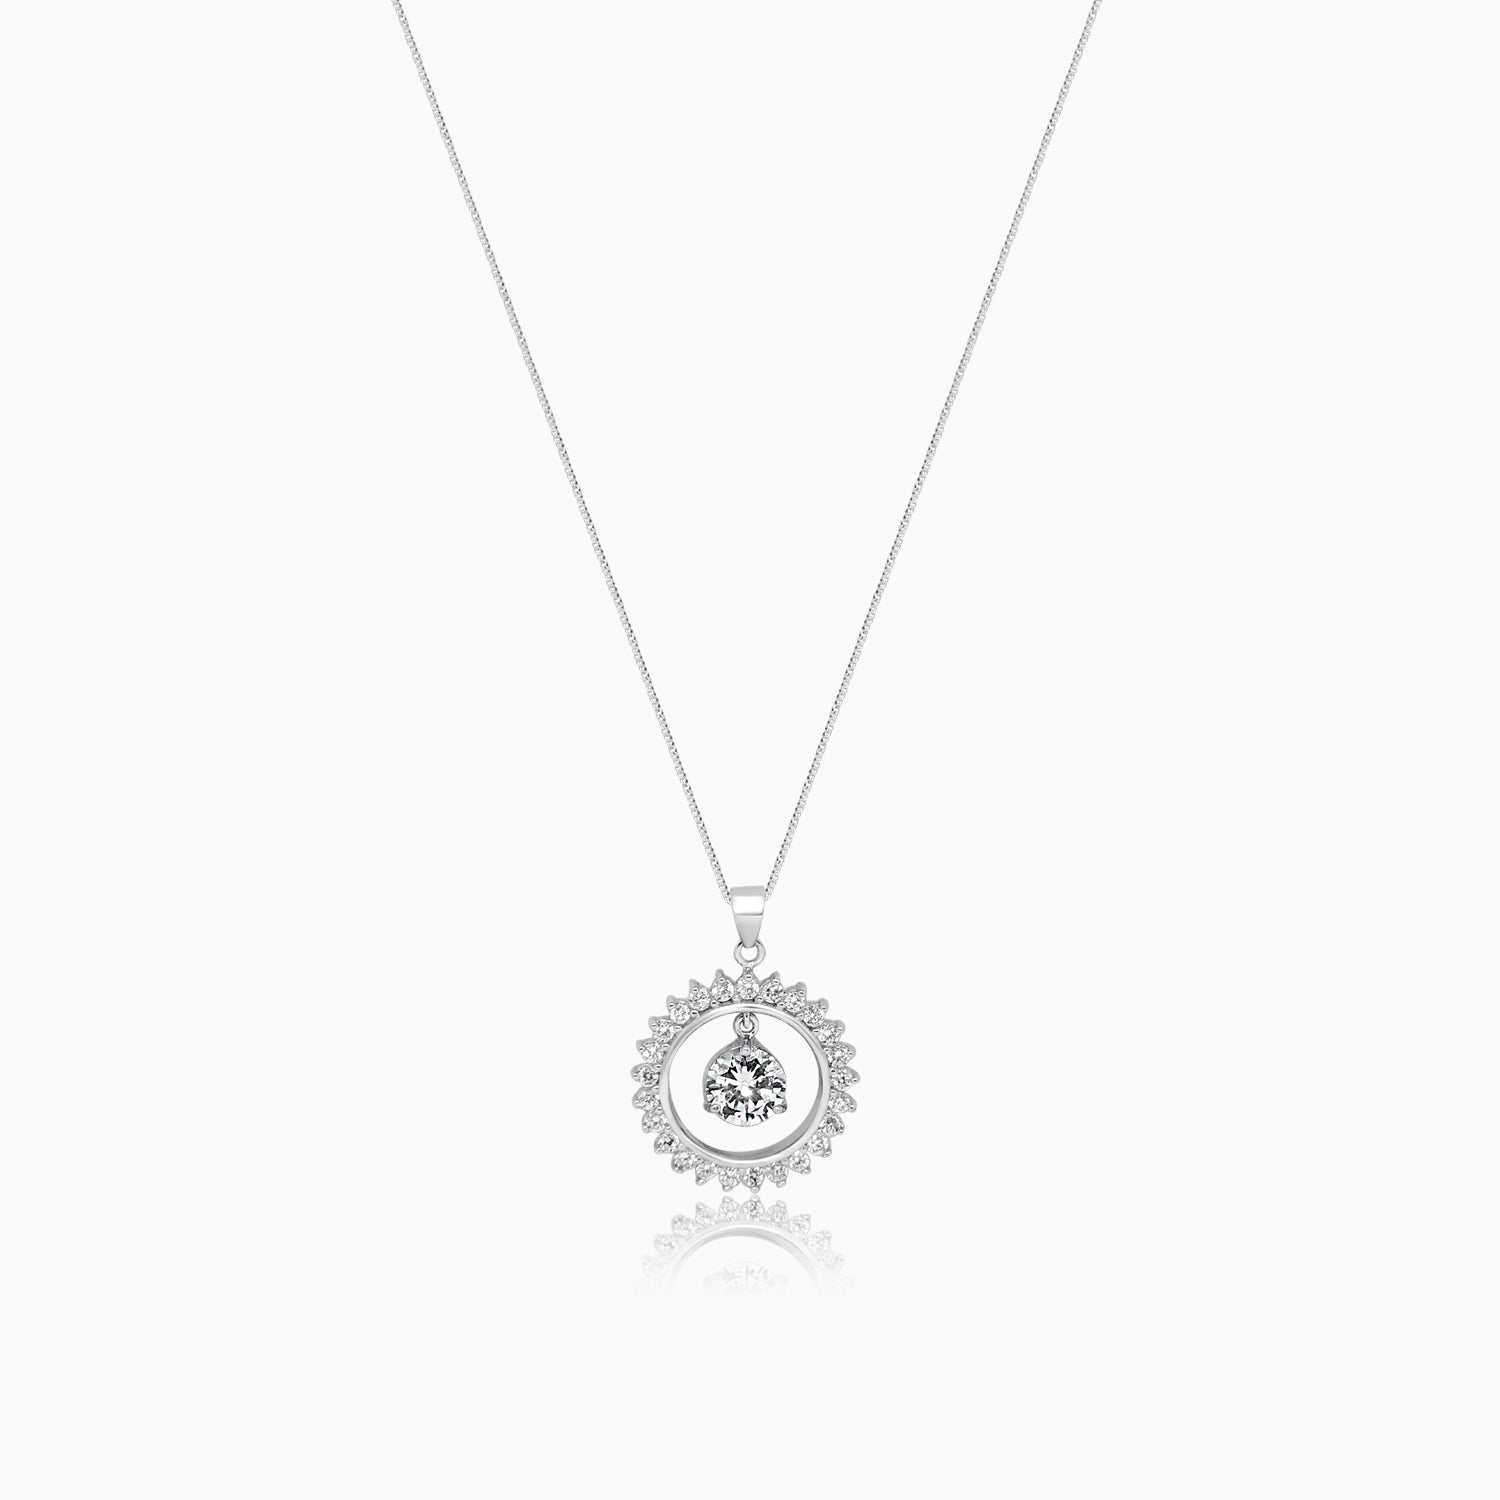 Silver Dangling Grandeur Solitaire in Sparkling Ring of Fire Pendant